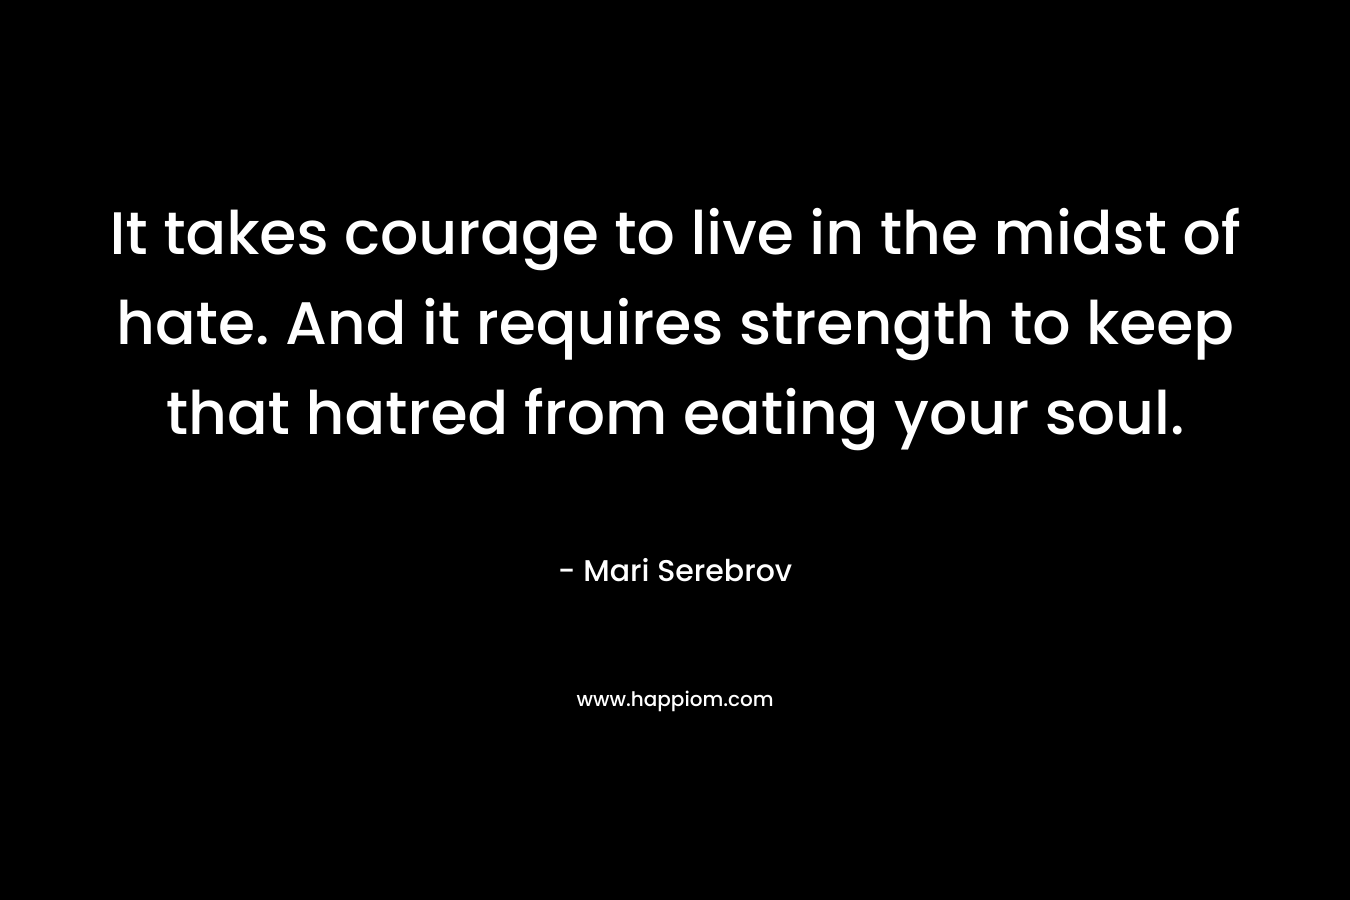 It takes courage to live in the midst of hate. And it requires strength to keep that hatred from eating your soul. – Mari Serebrov